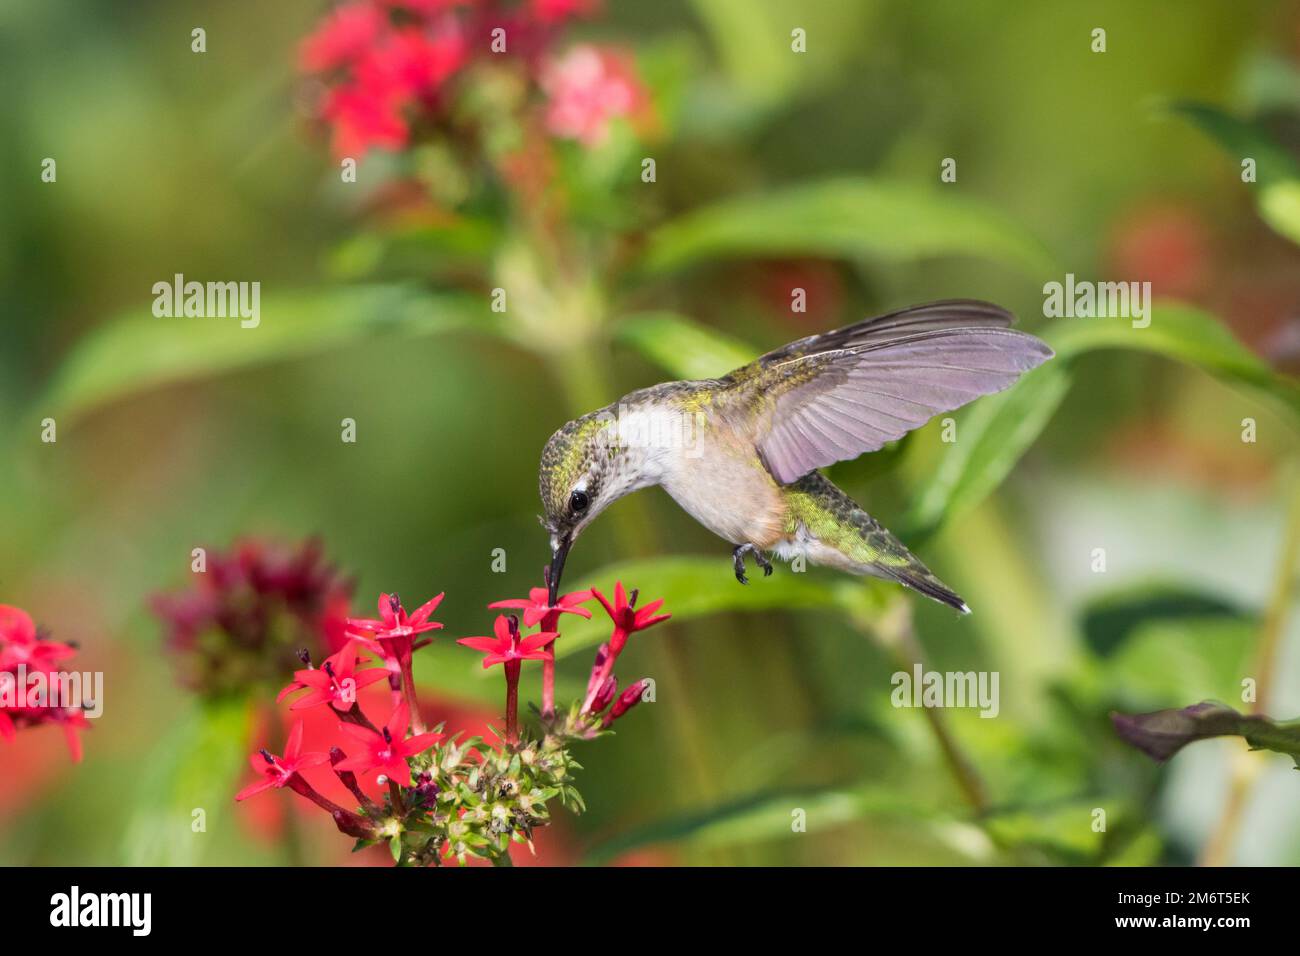 01162-14612 Ruby-throated Hummingbird (Archilochus colubris) at Red Pentas (Penta lanceolata) in Marion County, IL Stock Photo